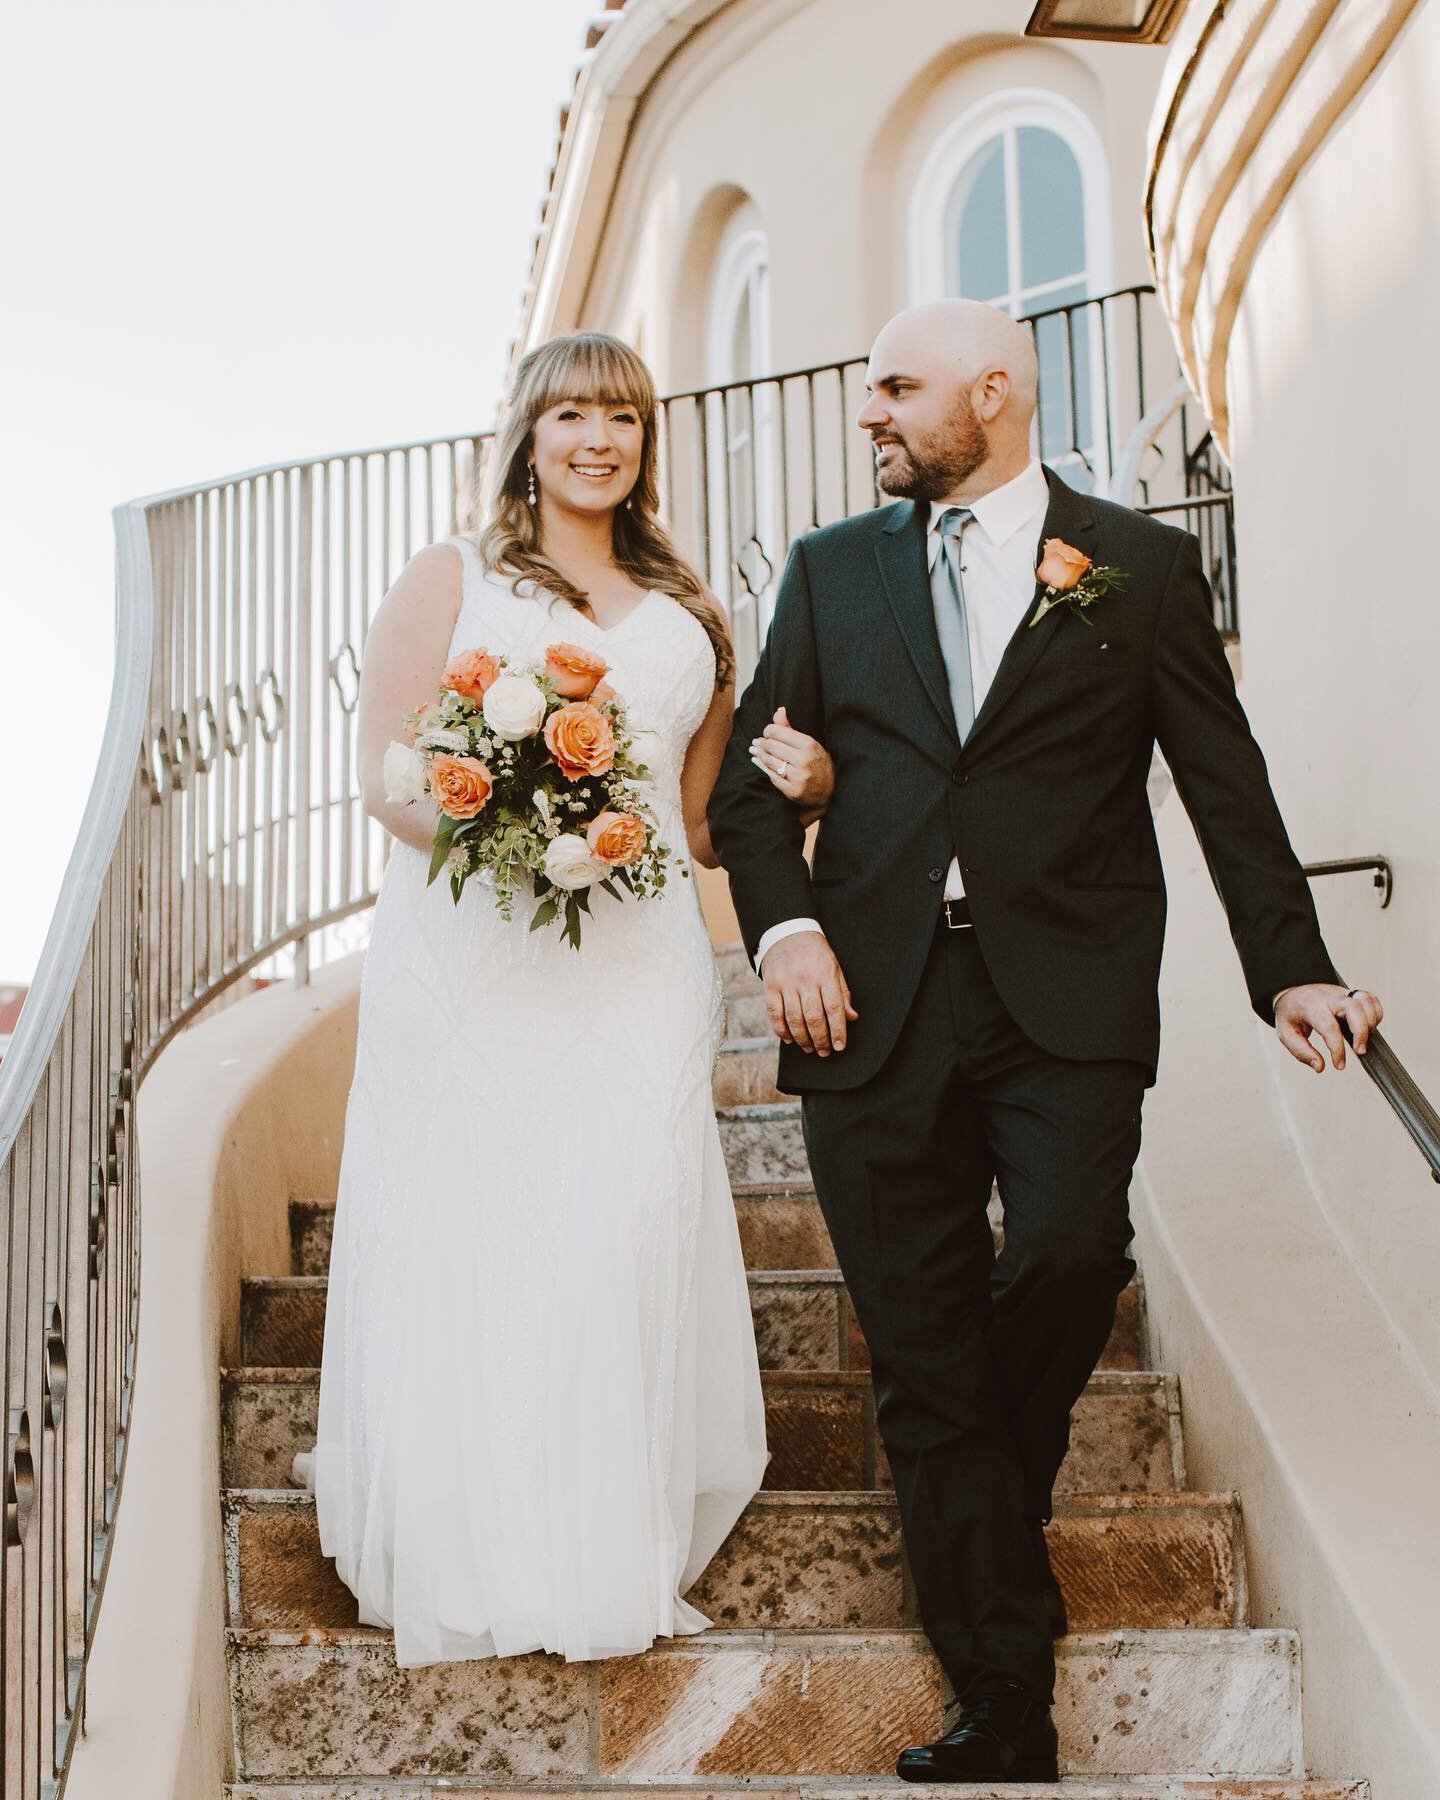 Alysia, Robert, and all the pretty little details from their intimate wedding day 🤍